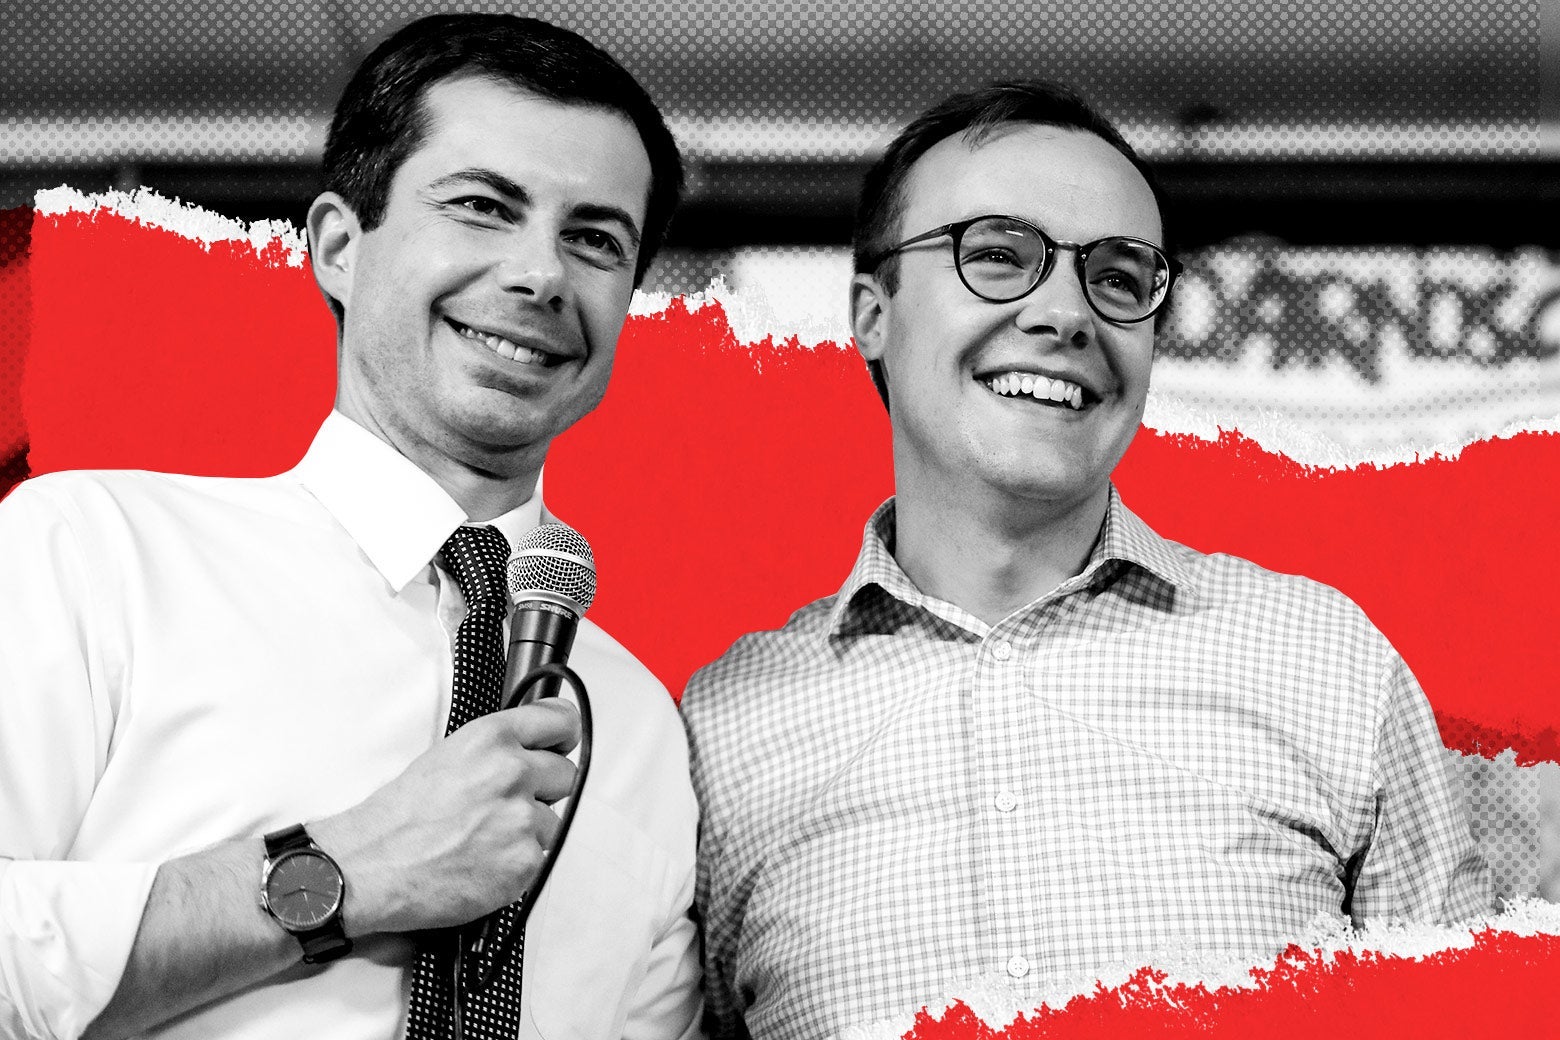 Pete Buttigieg smiles while holding a microphone with Chasten smiling beside him.